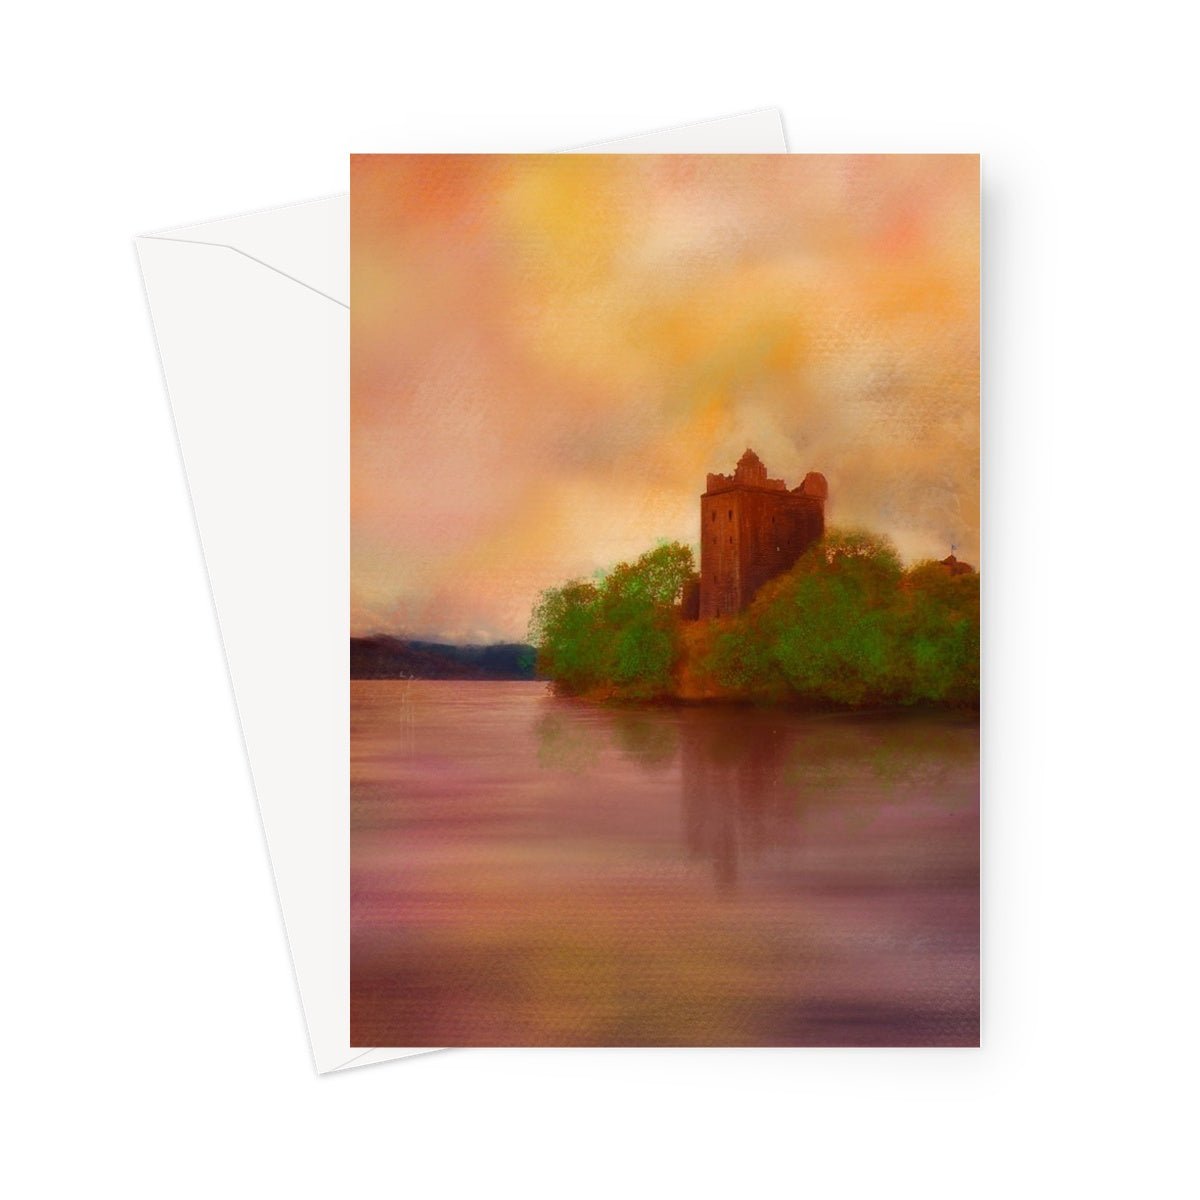 Urquhart Castle Art Gifts Greeting Card-Greetings Cards-Scottish Castles Art Gallery-5"x7"-10 Cards-Paintings, Prints, Homeware, Art Gifts From Scotland By Scottish Artist Kevin Hunter